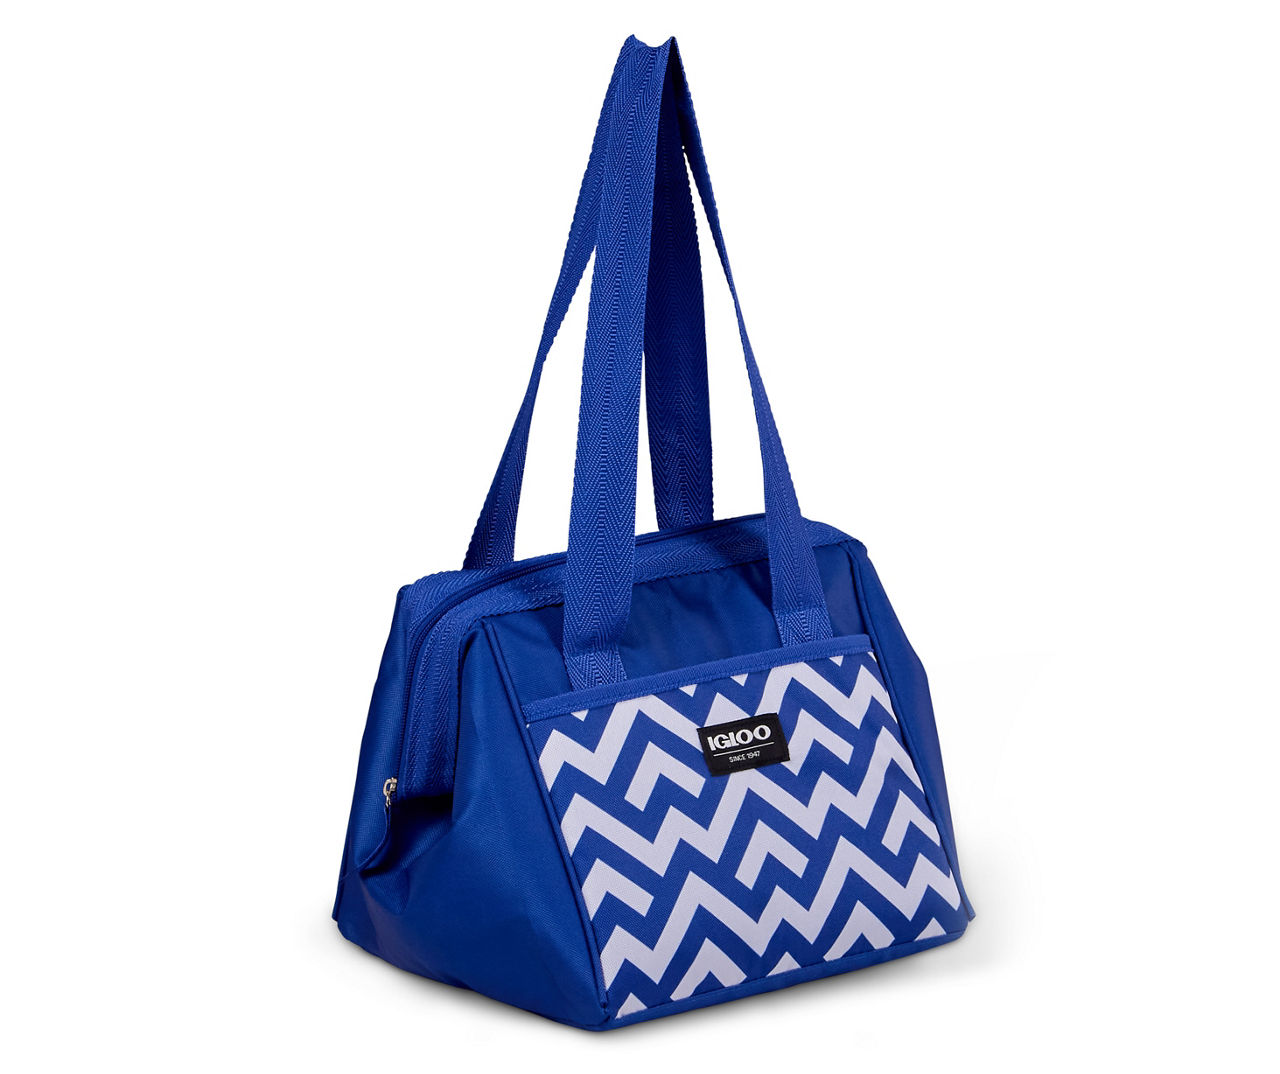 Igloo 9 Can Leftover Tote Lunch Cooler Bag - Navy, Blue